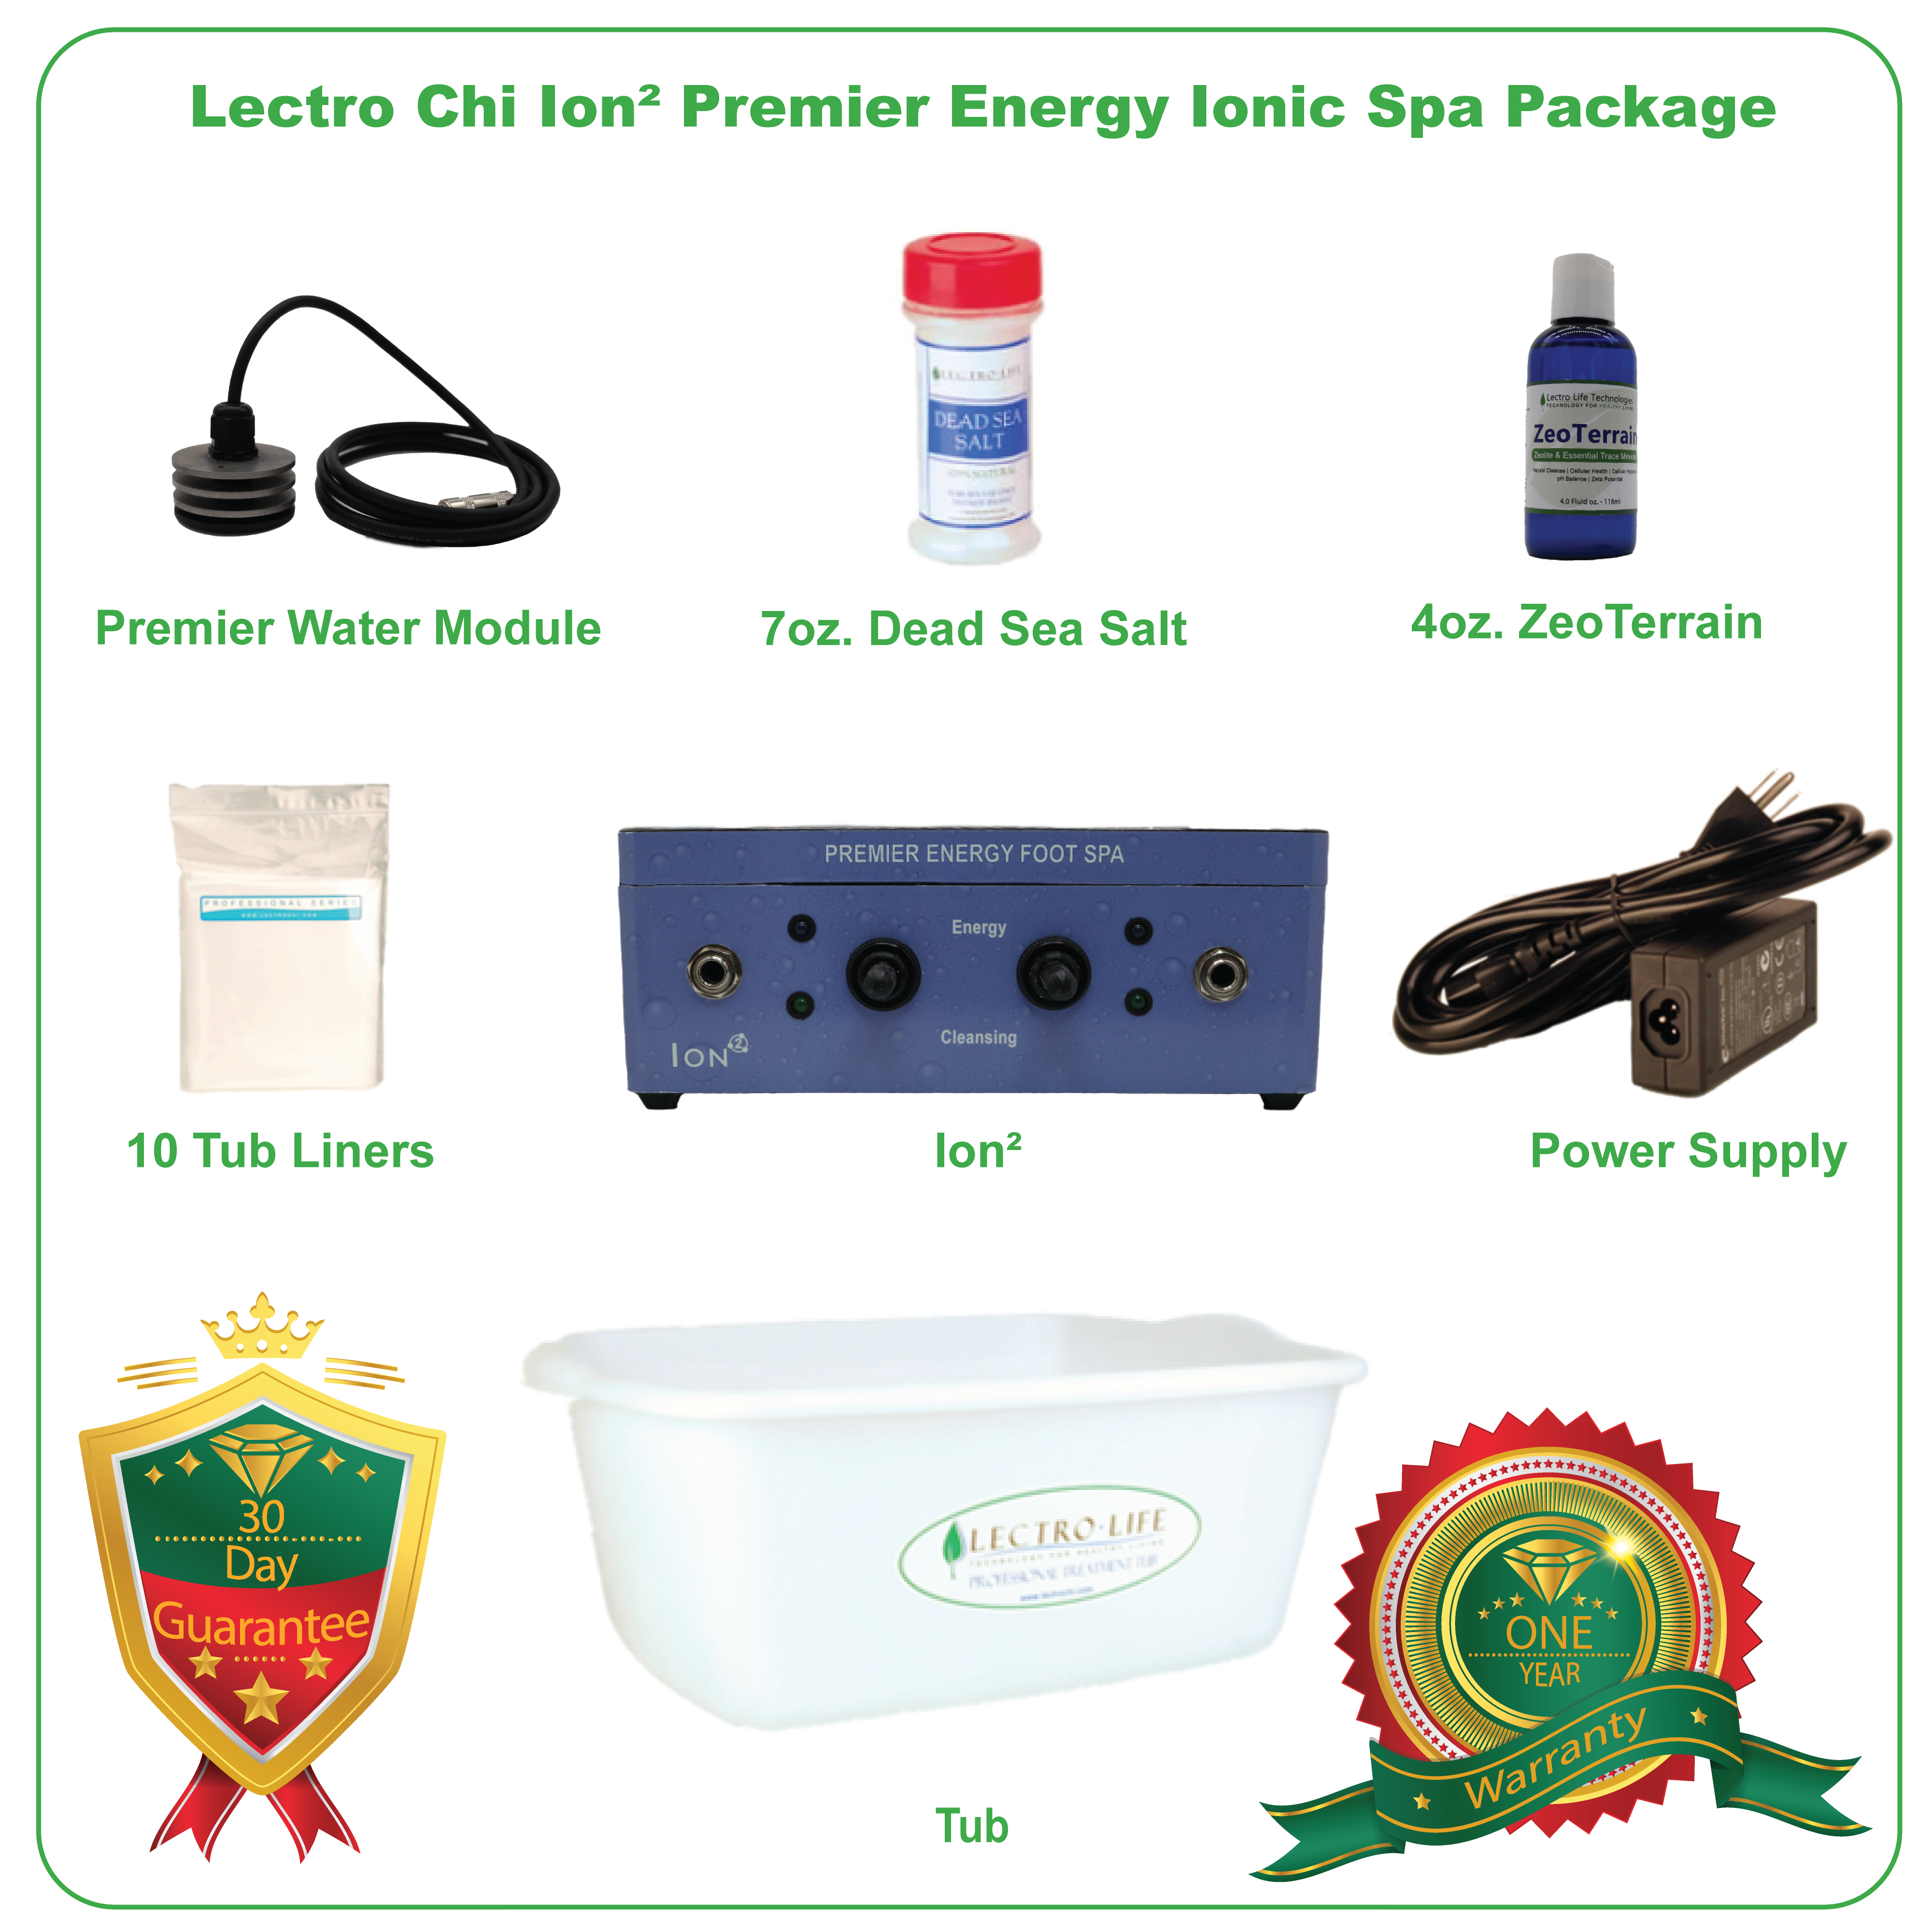 Lectro Chi Ion 2 Premier Energy Ionic Spa Package